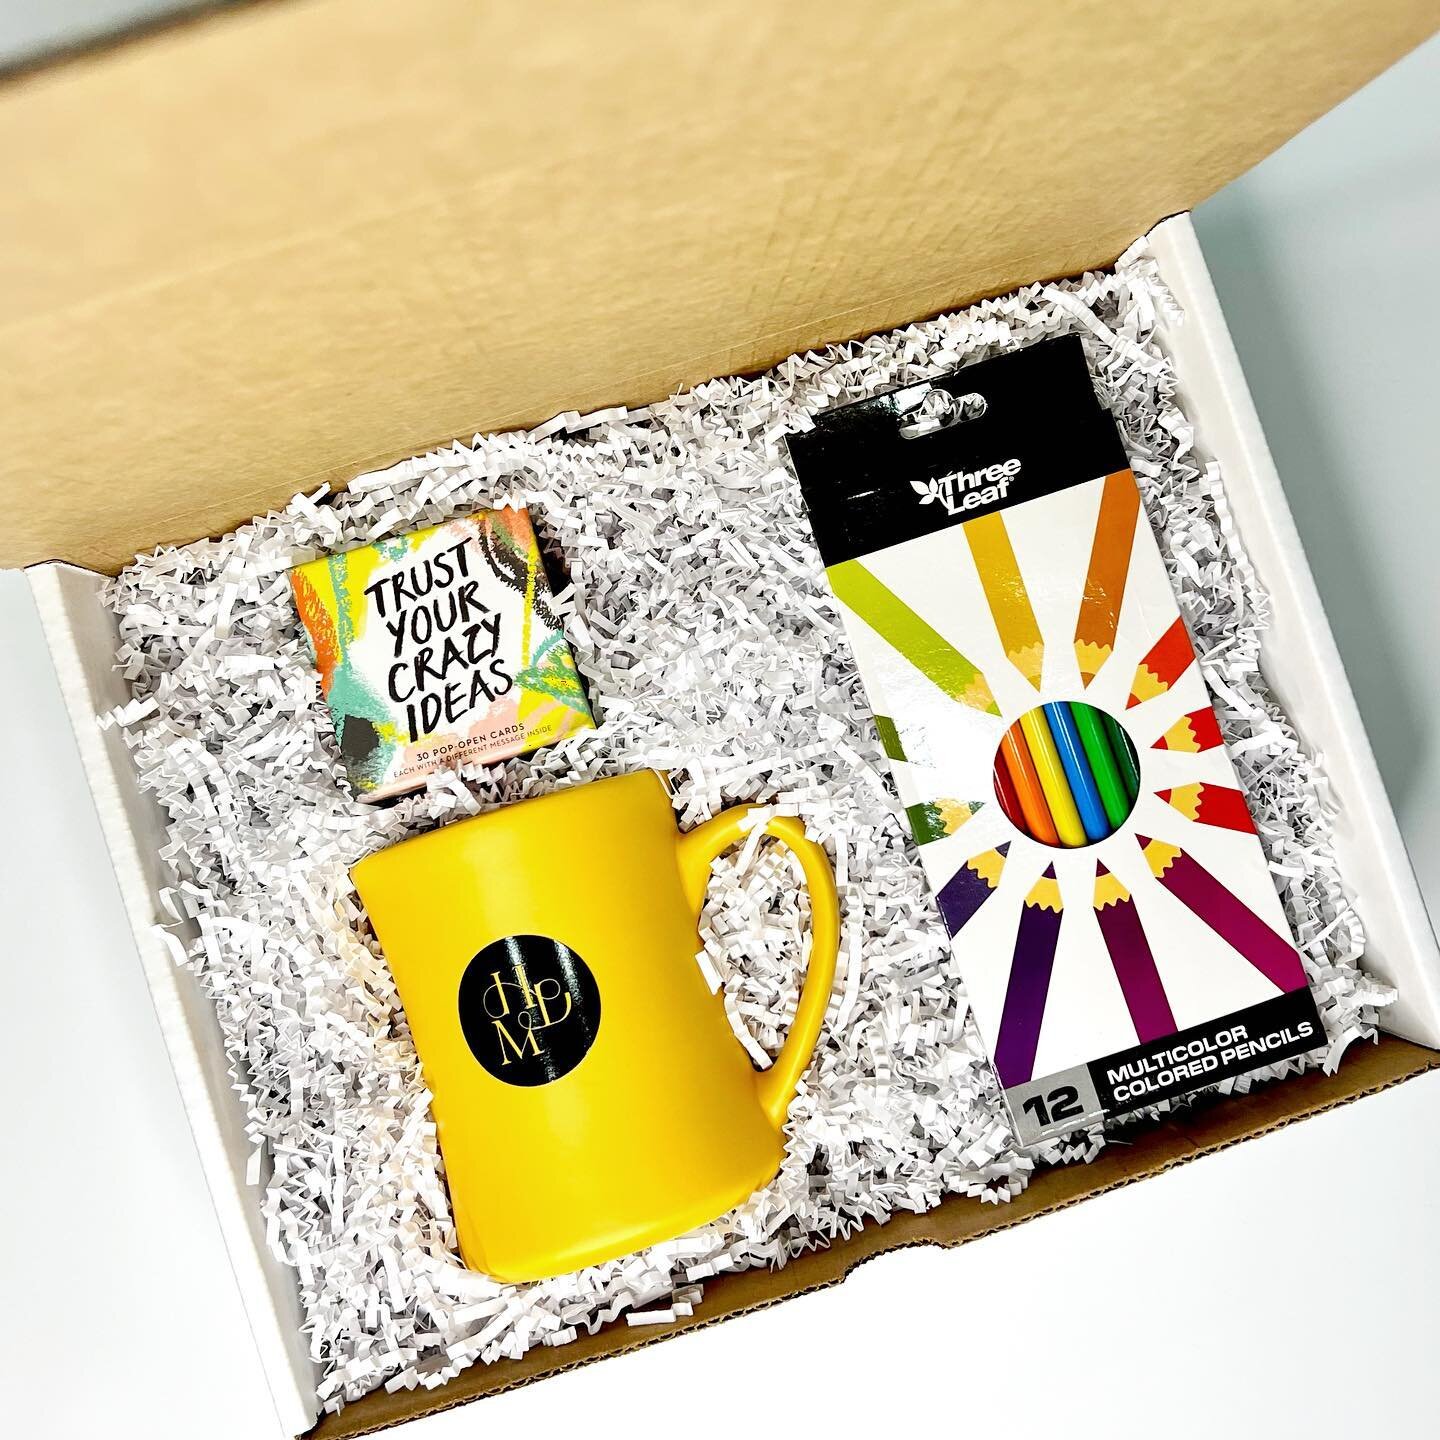 Don&rsquo;t be afraid of COLOR! 🌈&hearts;️🙌🏼

I love this bright, vibrant gift designed for the fabulous @hayleydenkermarketing. These gifts were designed to inspire imagination and innovation in the recipient(s).

How do you unleash your inner cr